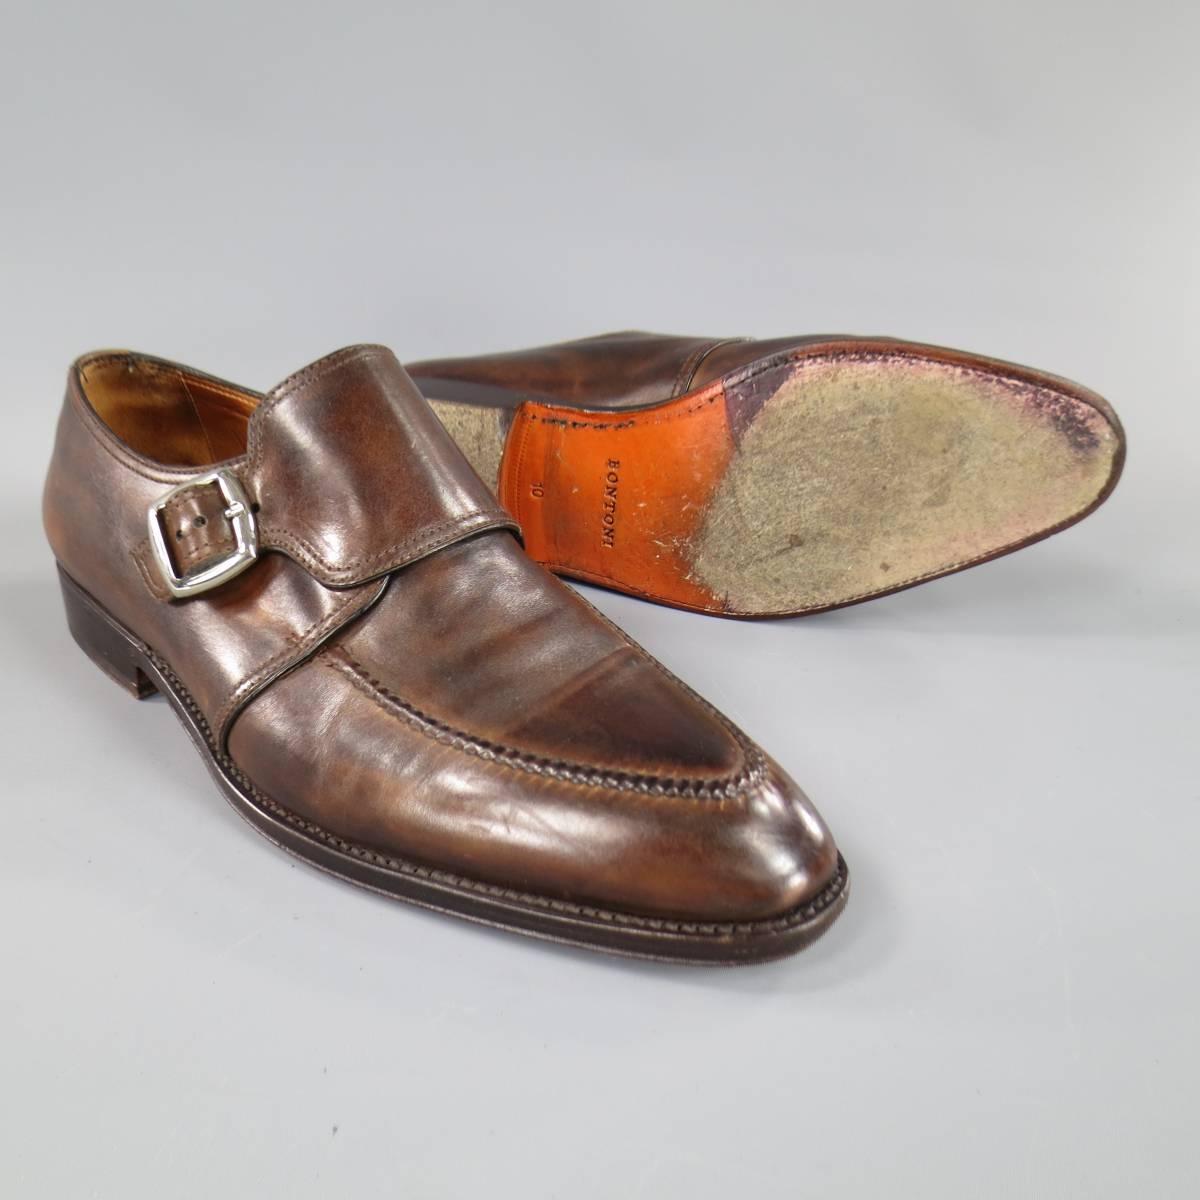 These BONTONI dress shoes come in tonal brown leather with a pointed top stitch toe and thick monk strap with buckle. With Box. Made in Italy. Retails at $1050.00.
 
Good Pre-Owned Condition.
Marked: 10
 
12 x 4 in.